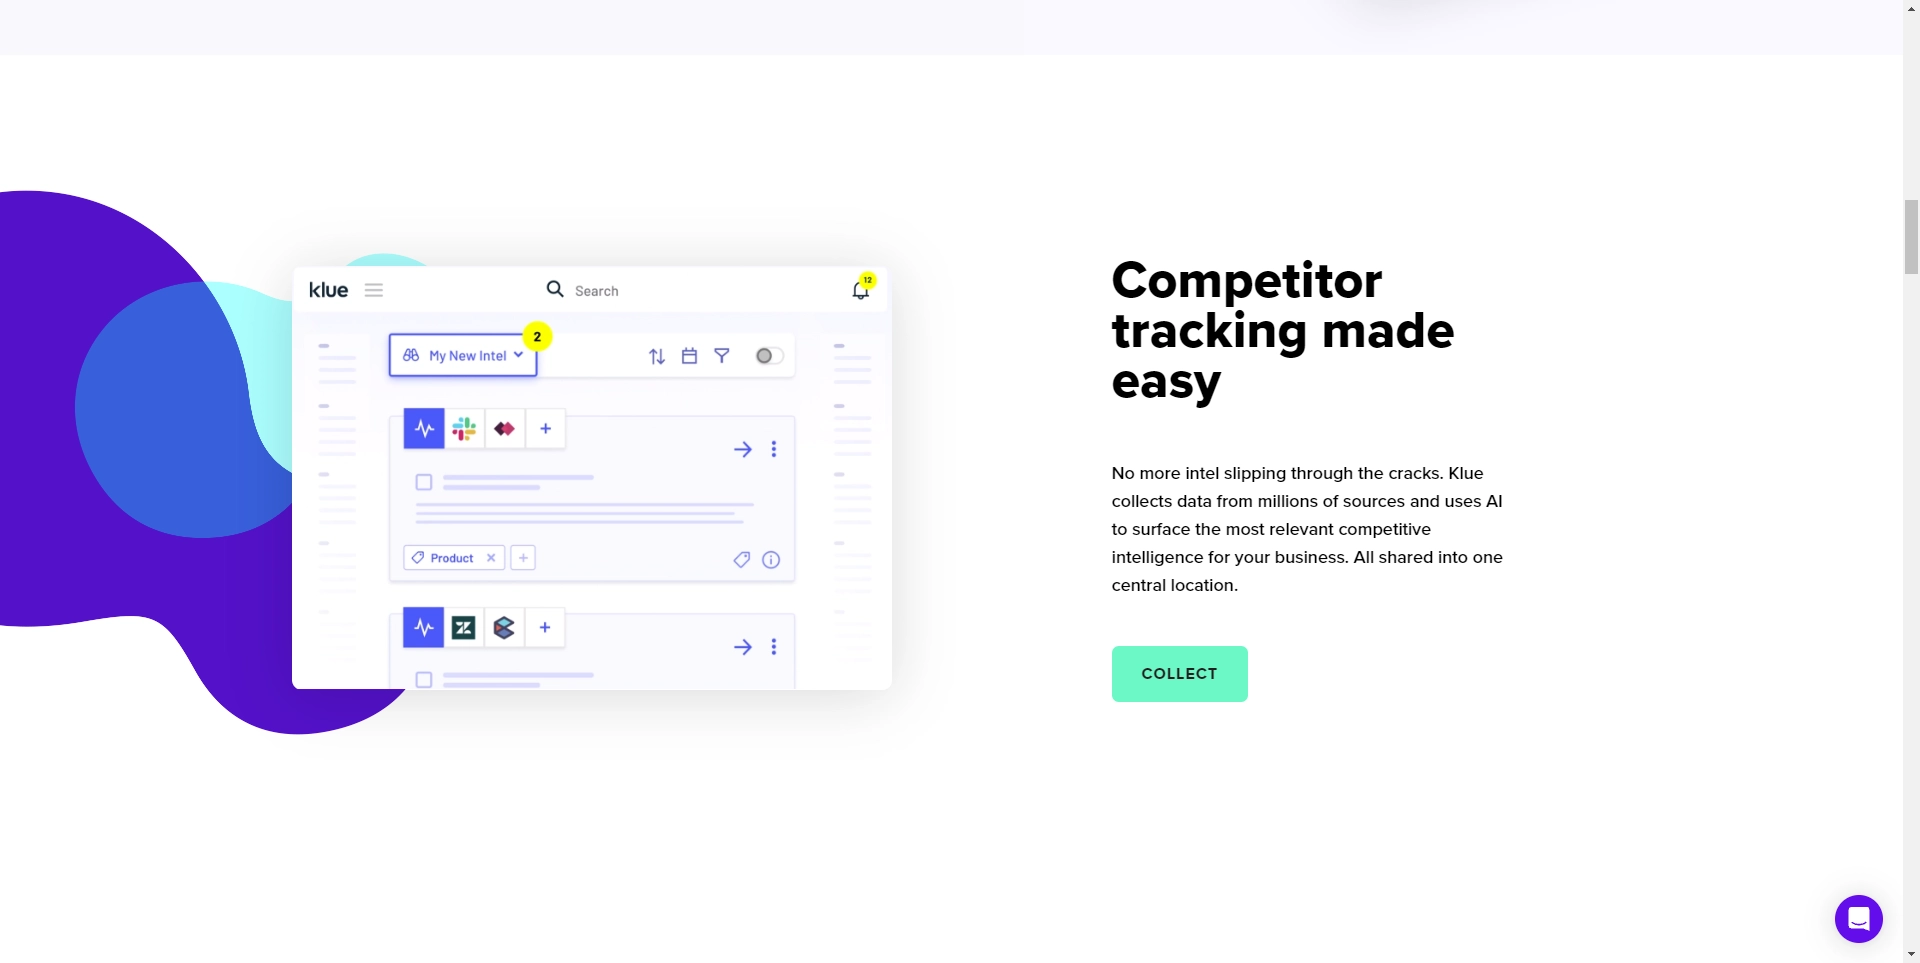 Klue's competitor tracking feature and visualization showing how it works along with a description